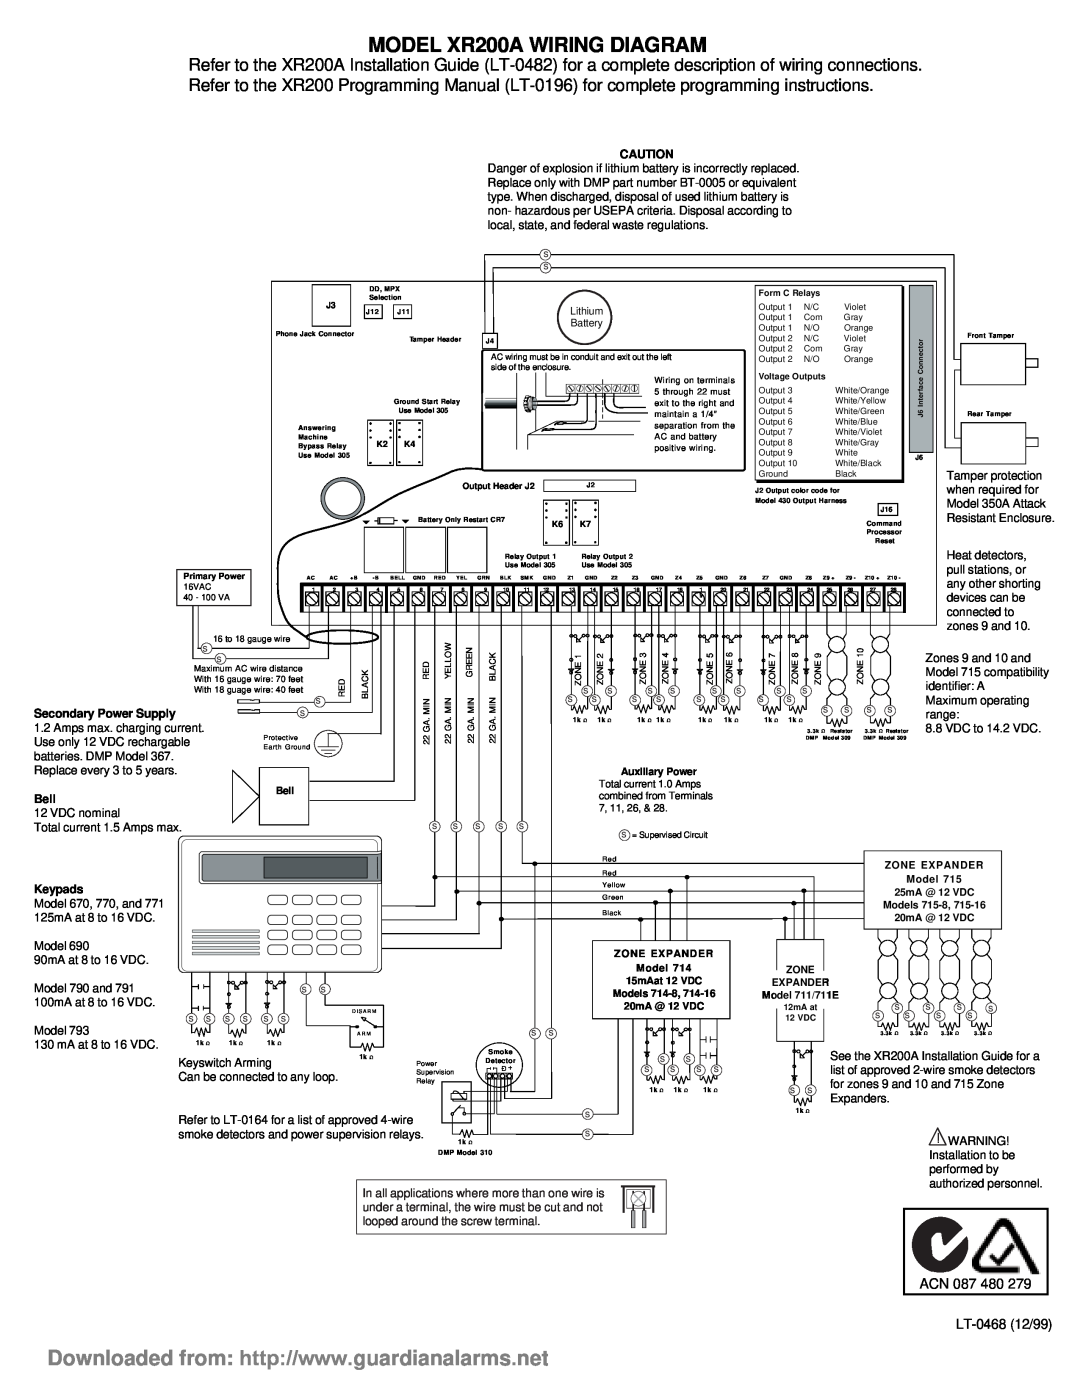 DMP Electronics manual MODEL XR200A WIRING DIAGRAM, ACN 087 480 LT-046812/99, Secondary Power Supply, Bell, Keypads 